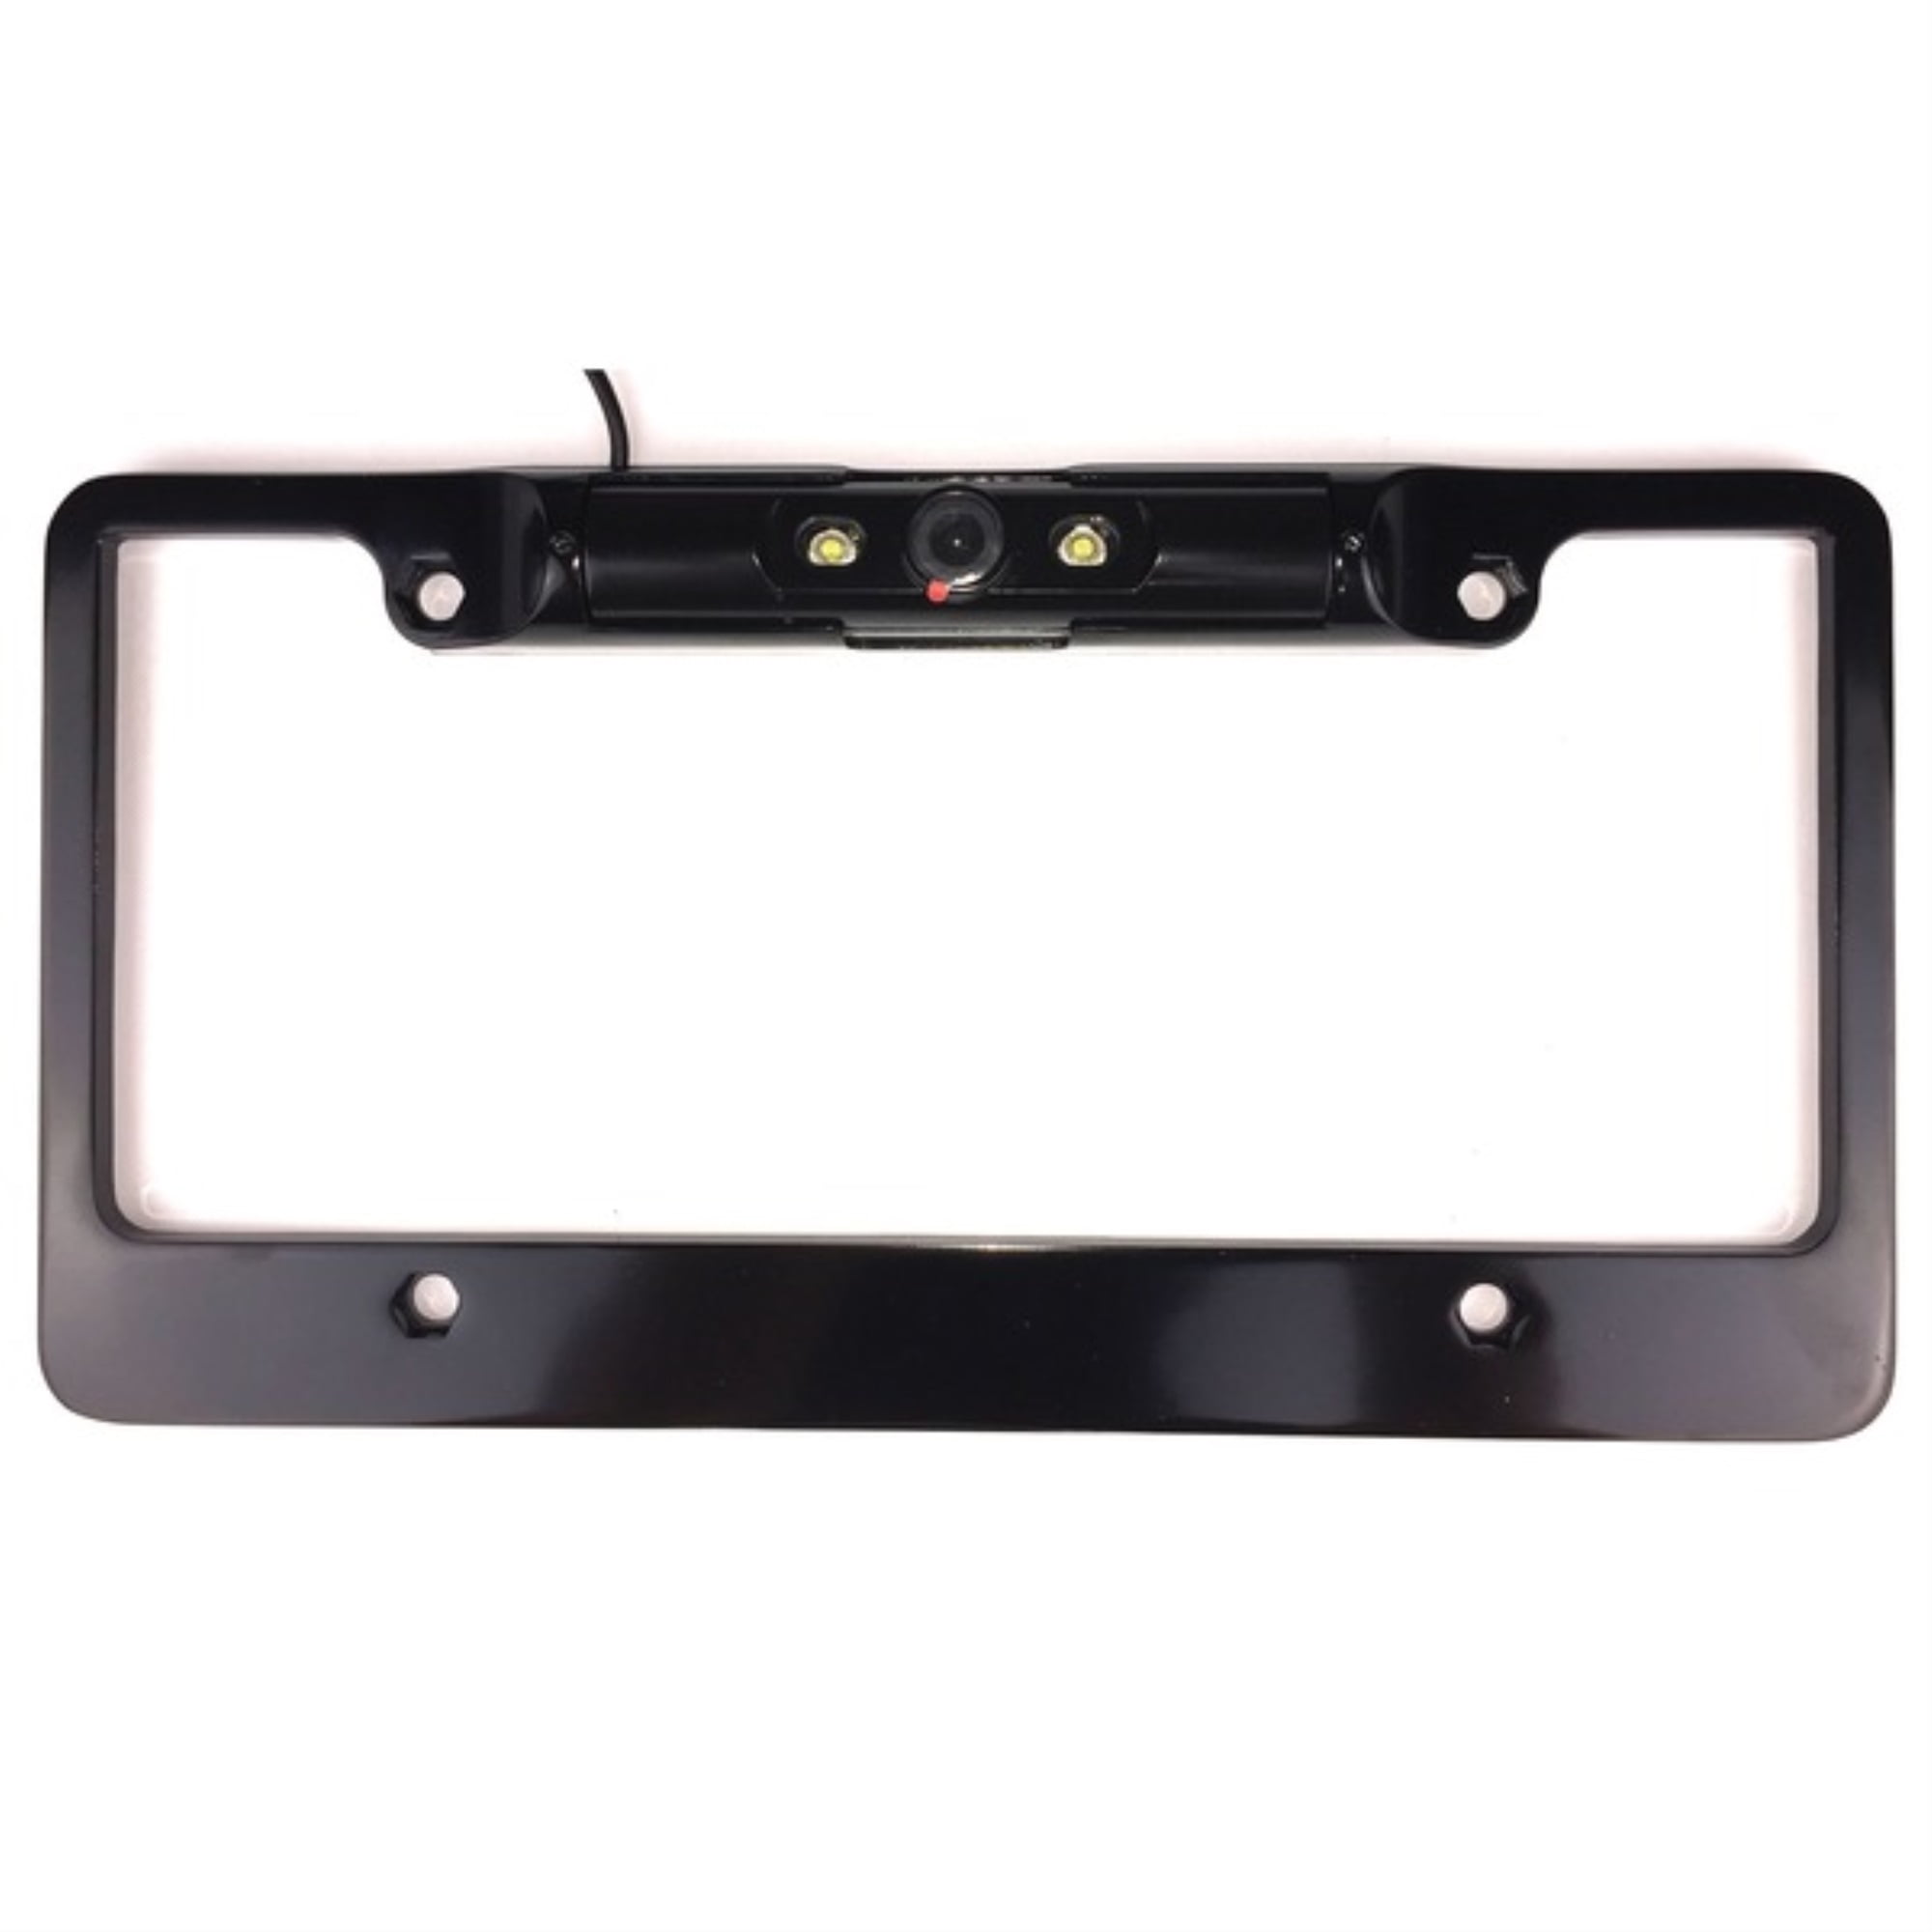 Boyo Full Frame License Plate Mount Camera with Built-In LED Lights